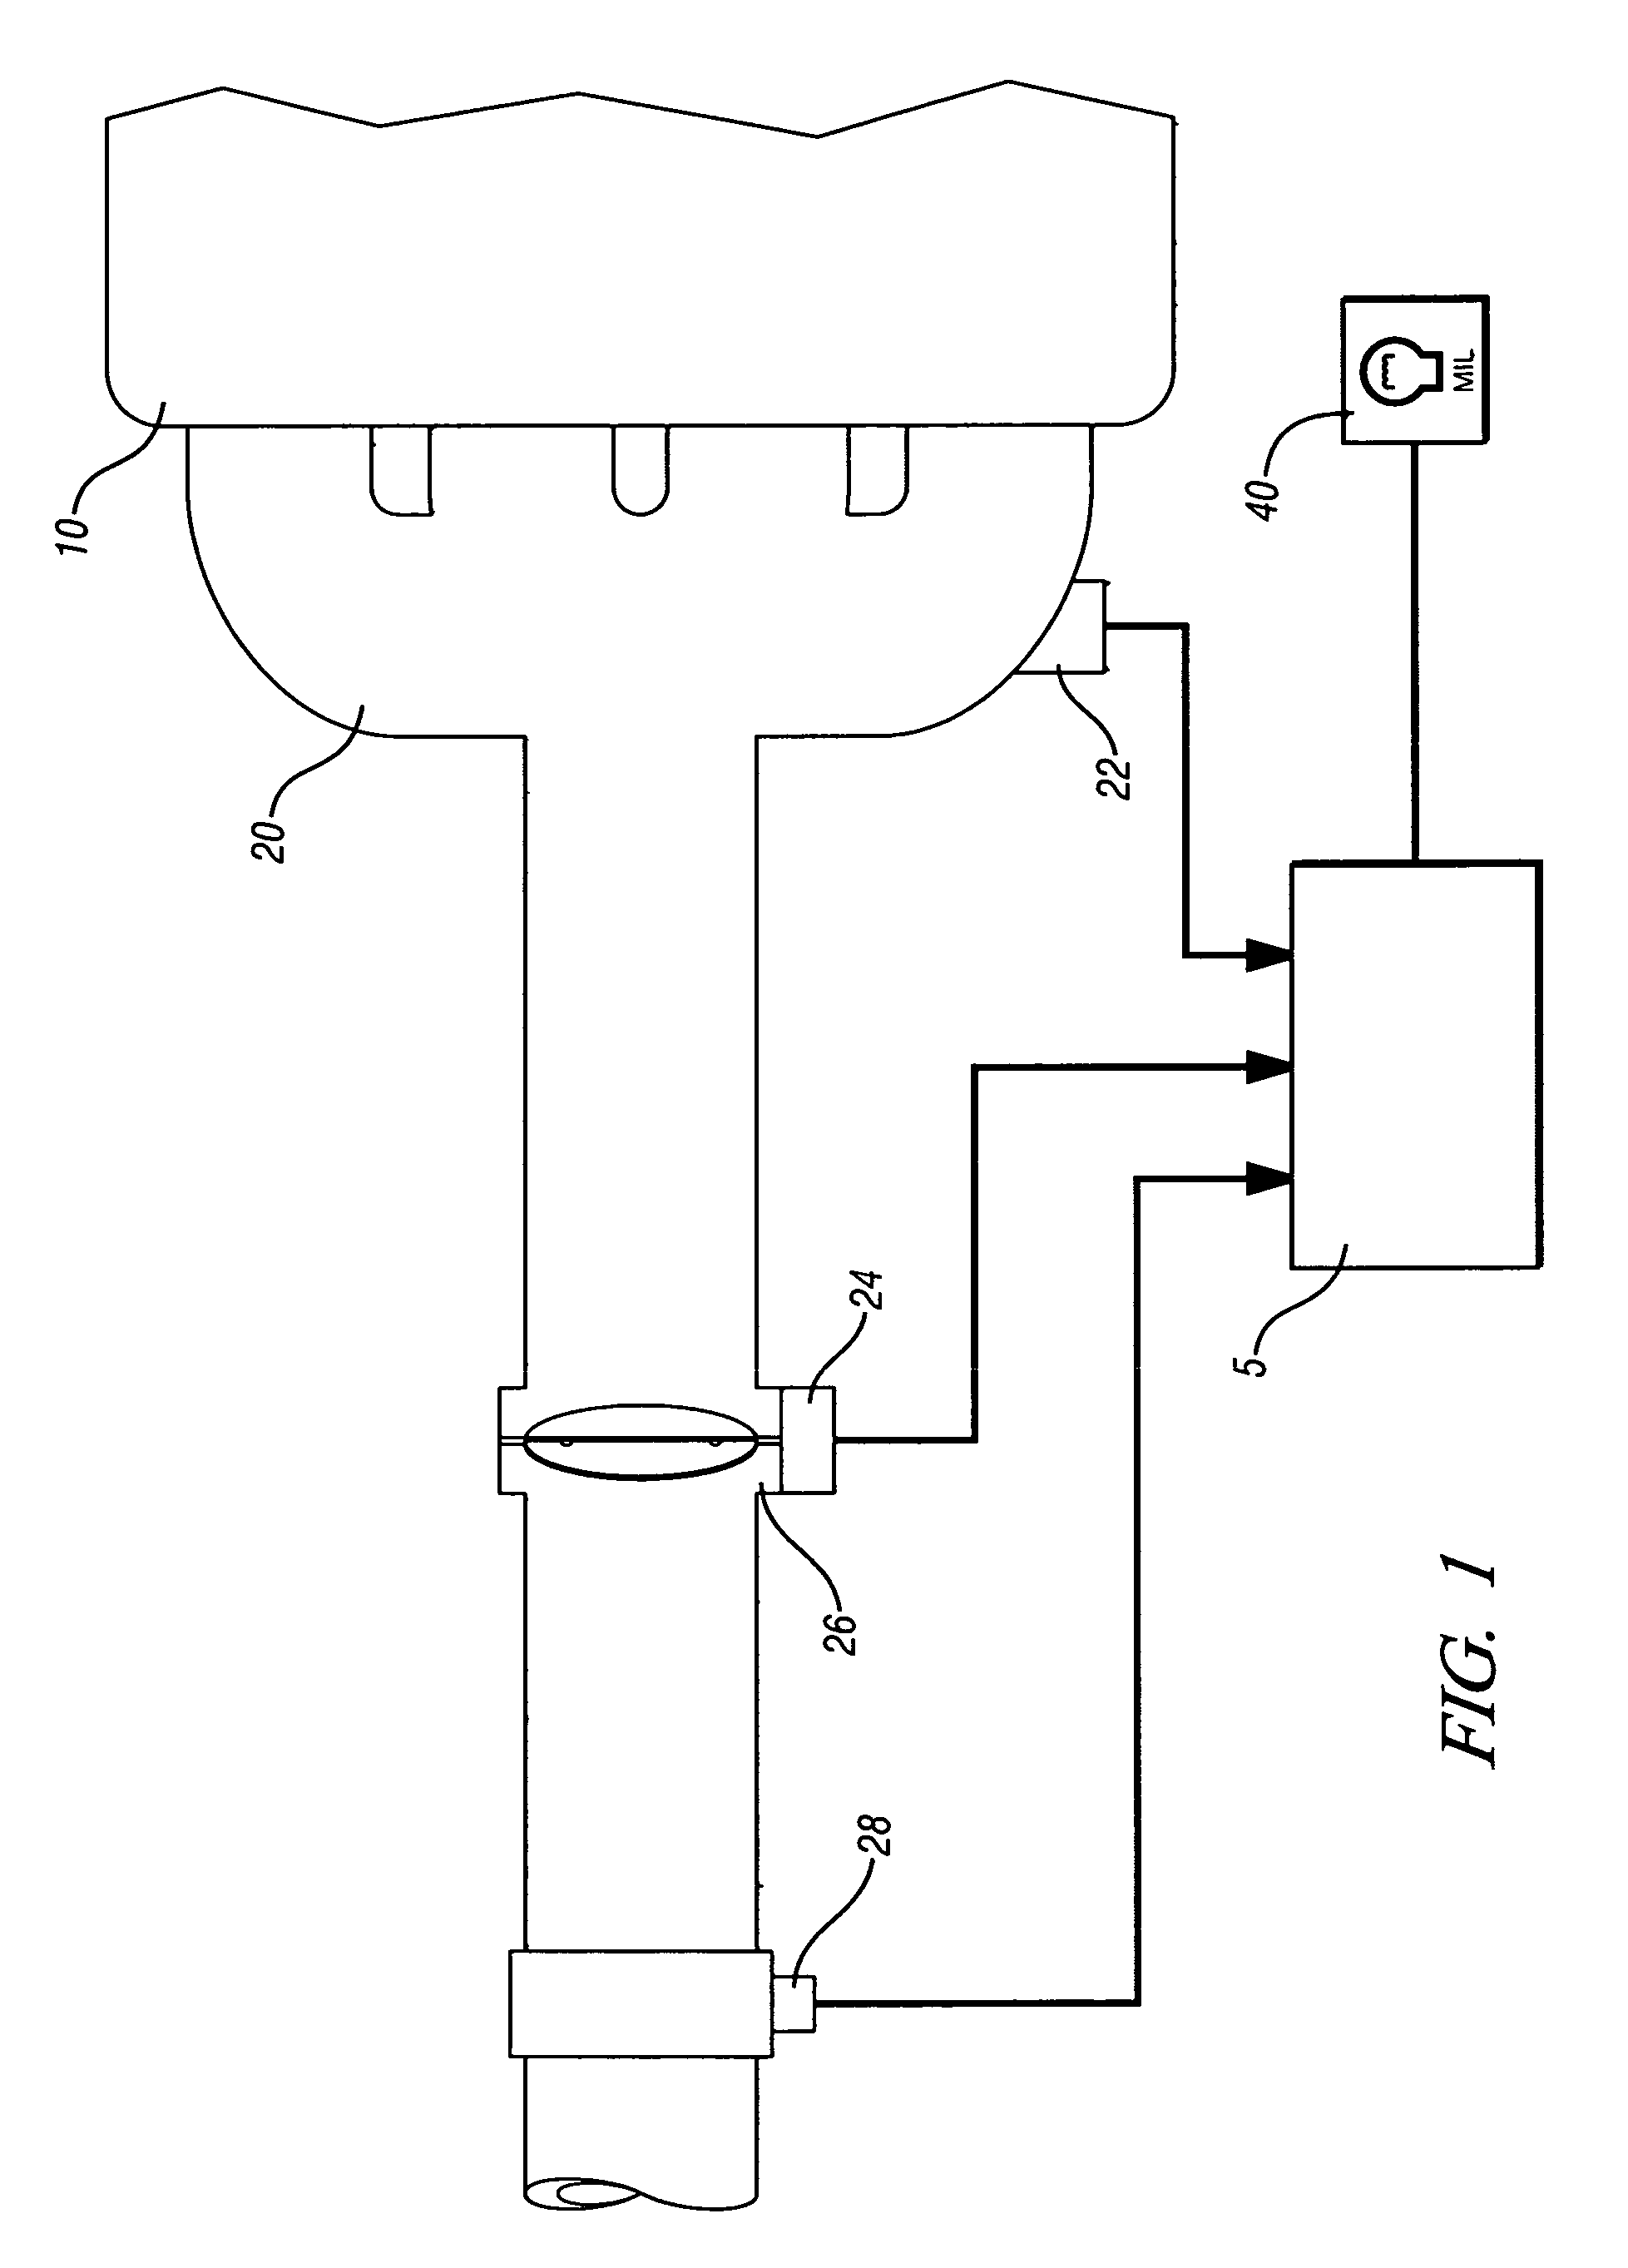 Adaptive throttle model for air intake system diagnostic